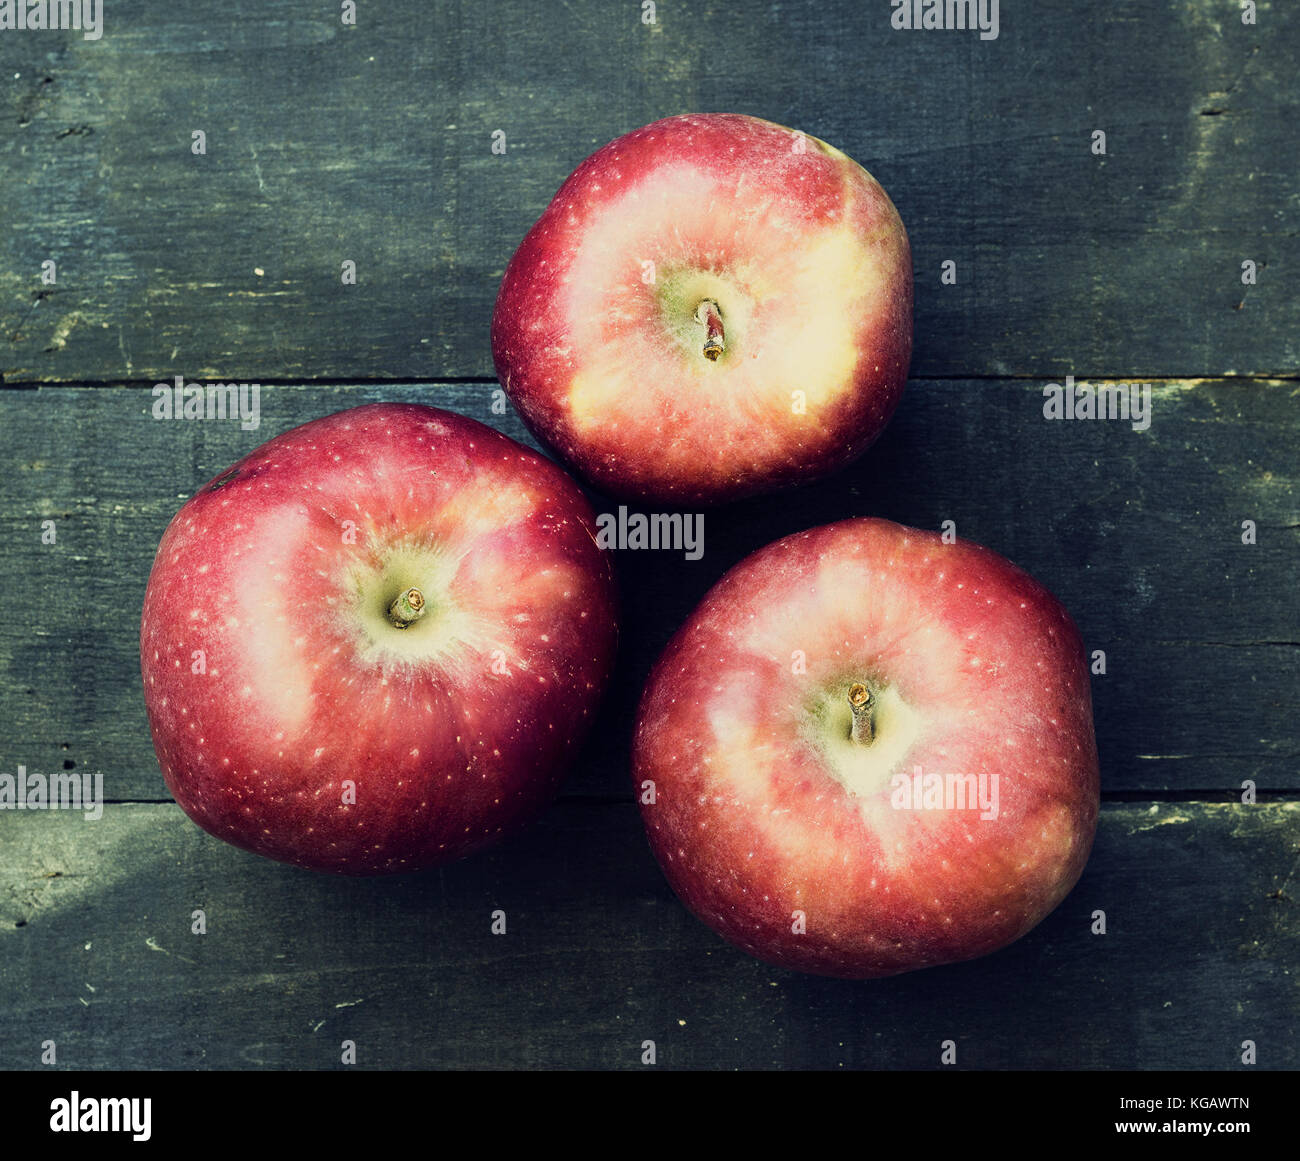 Red delicious apple on a wooden surface - vintage look Stock Photo